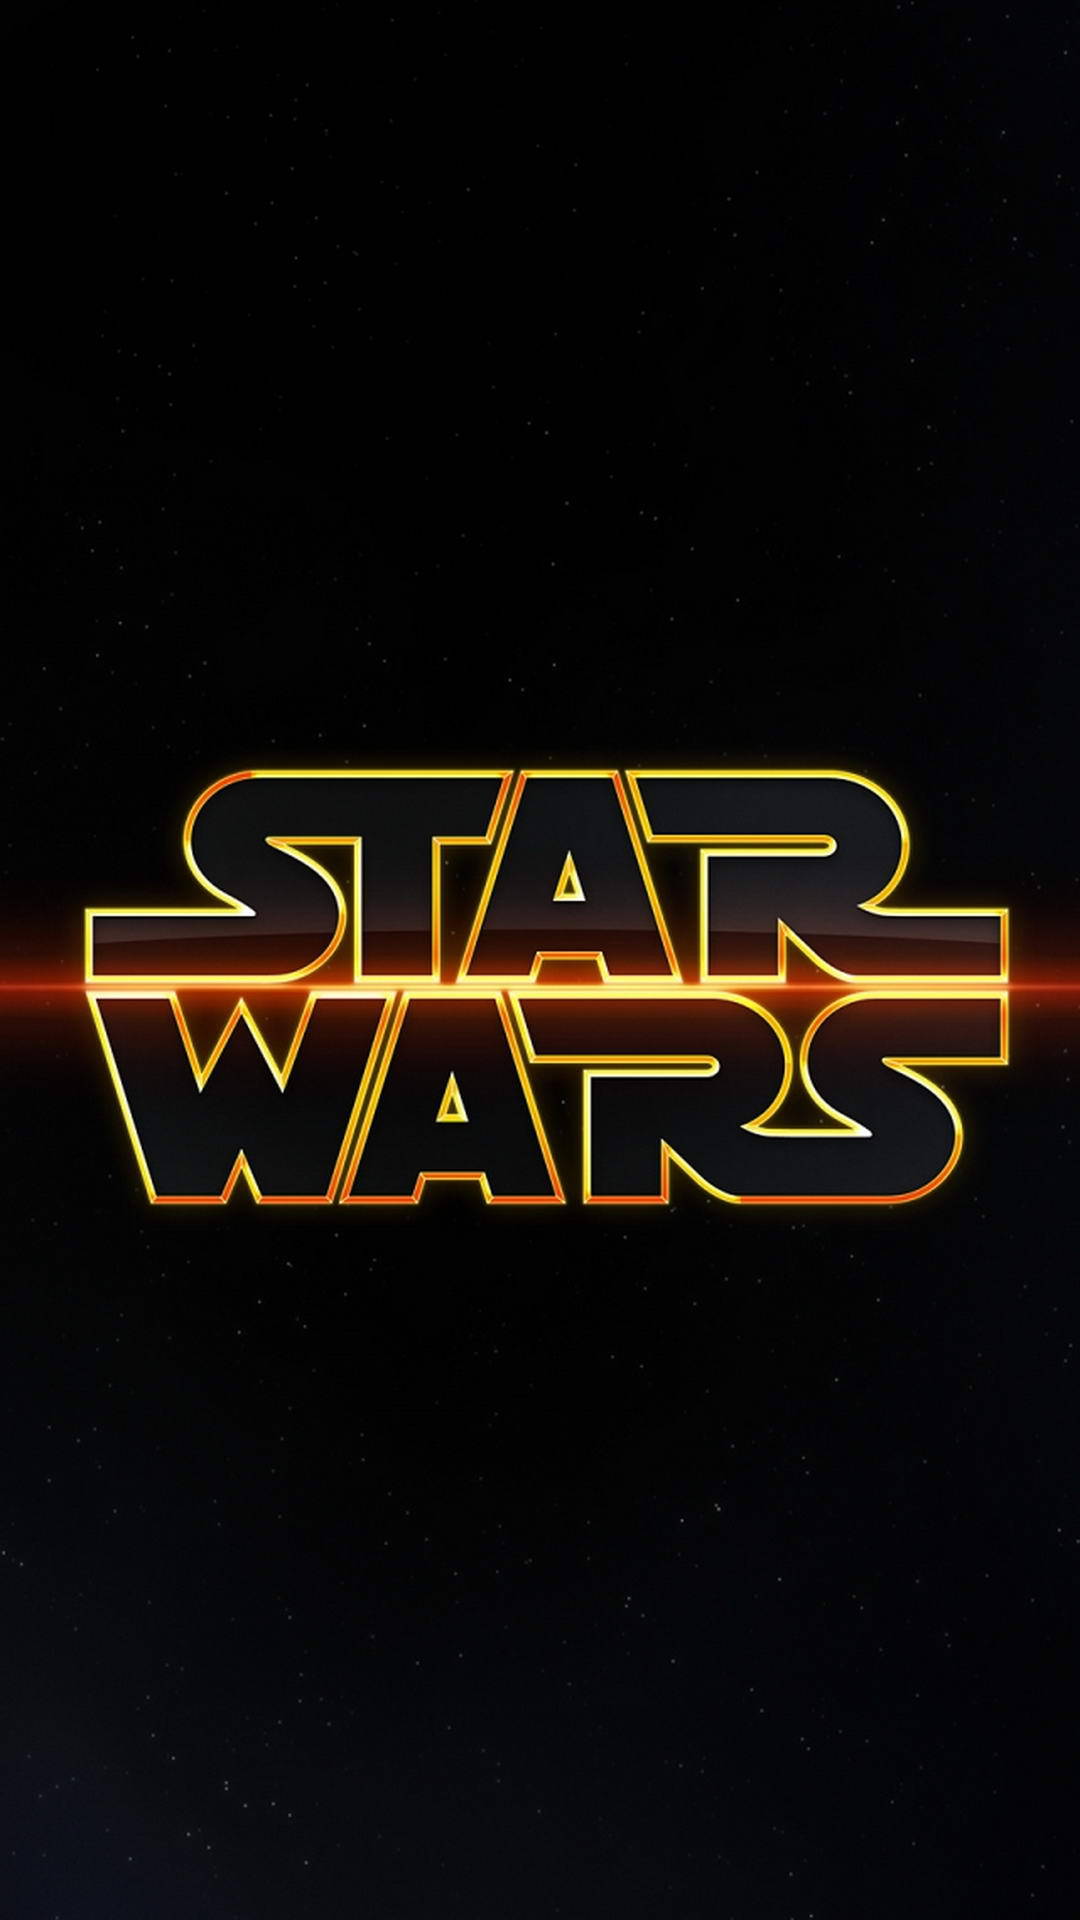 star-wars-classic-logo-android-wallpaper